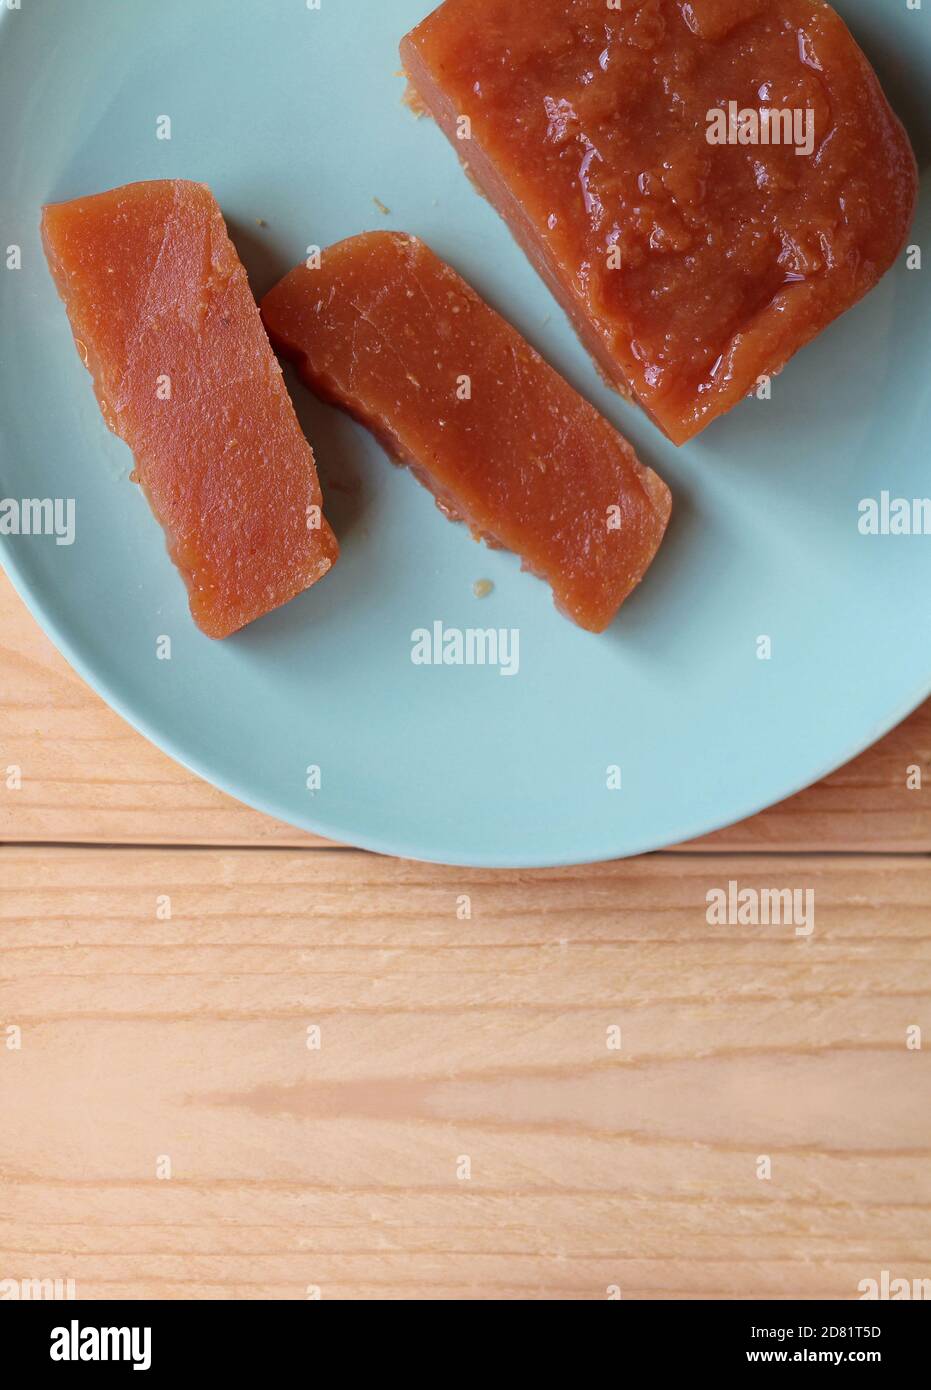 Top down view of home made Quince paste: Dulce de Membrillo. Sliced on a green plate on a wooden table, with copyspace below. A sweet treat which is a Stock Photo